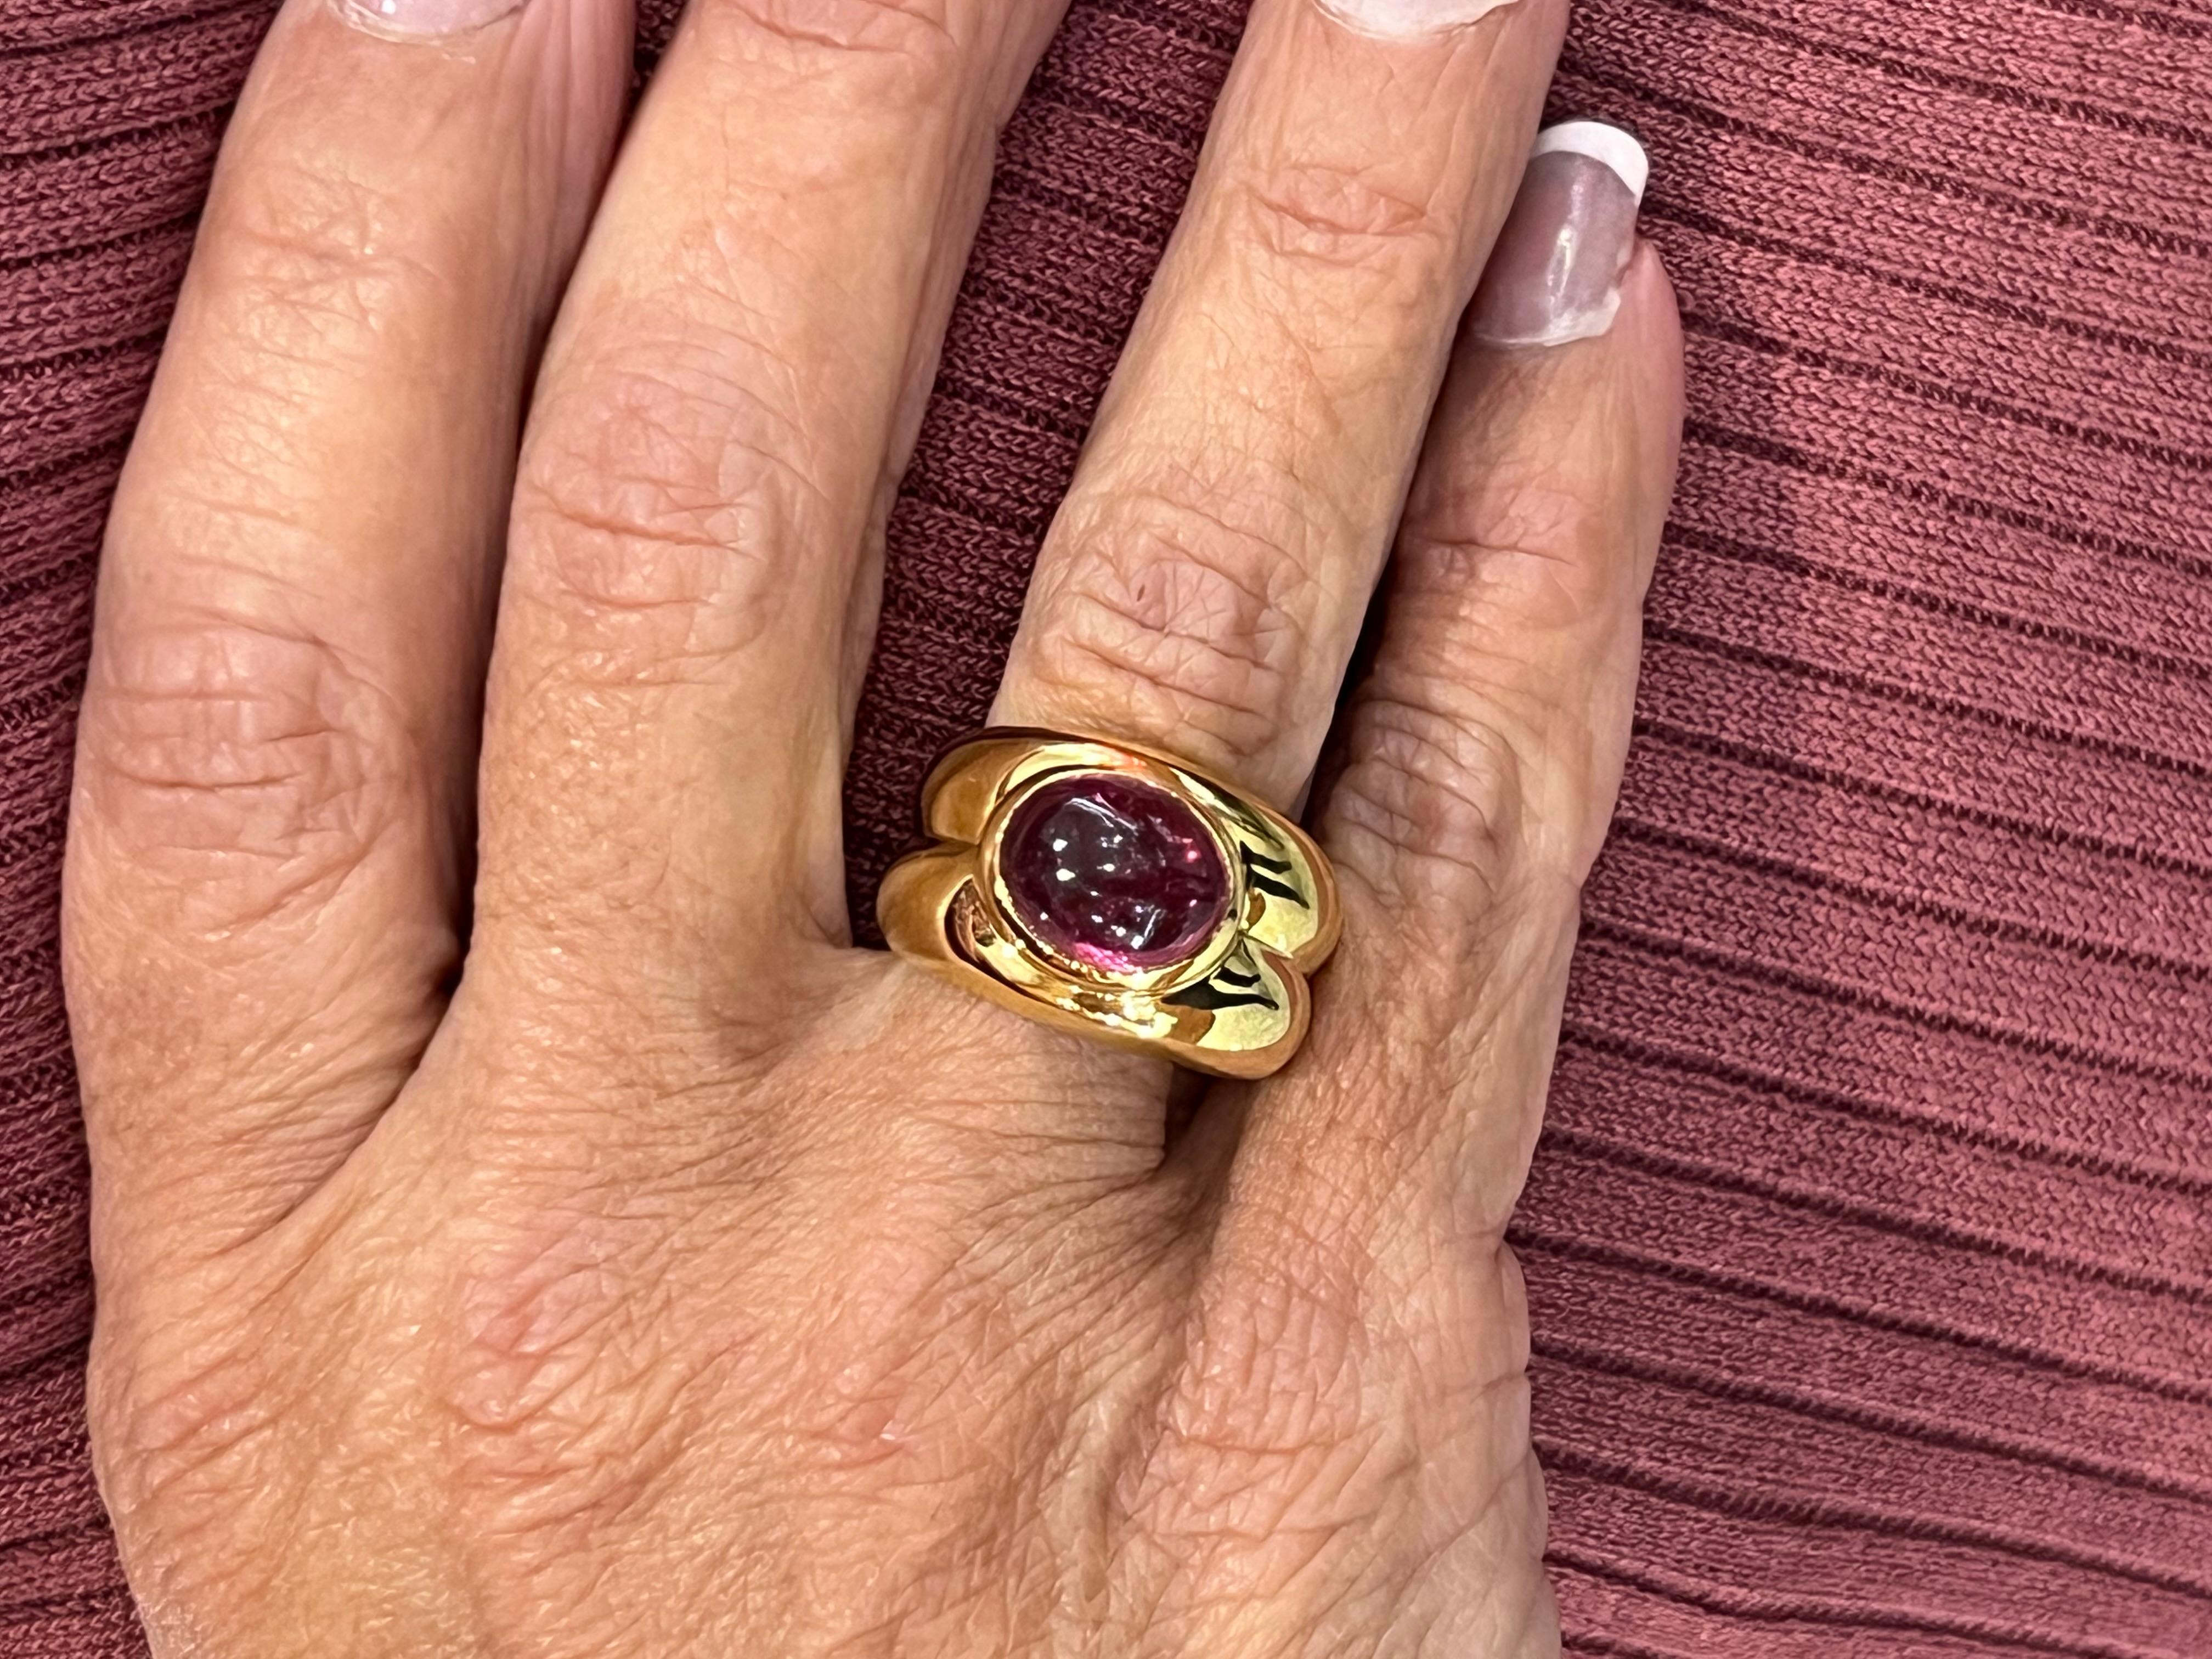 Tiffany & Co. Pinkish- Red Rubellite Tourmaline Ring In Excellent Condition For Sale In Knoxville, TN